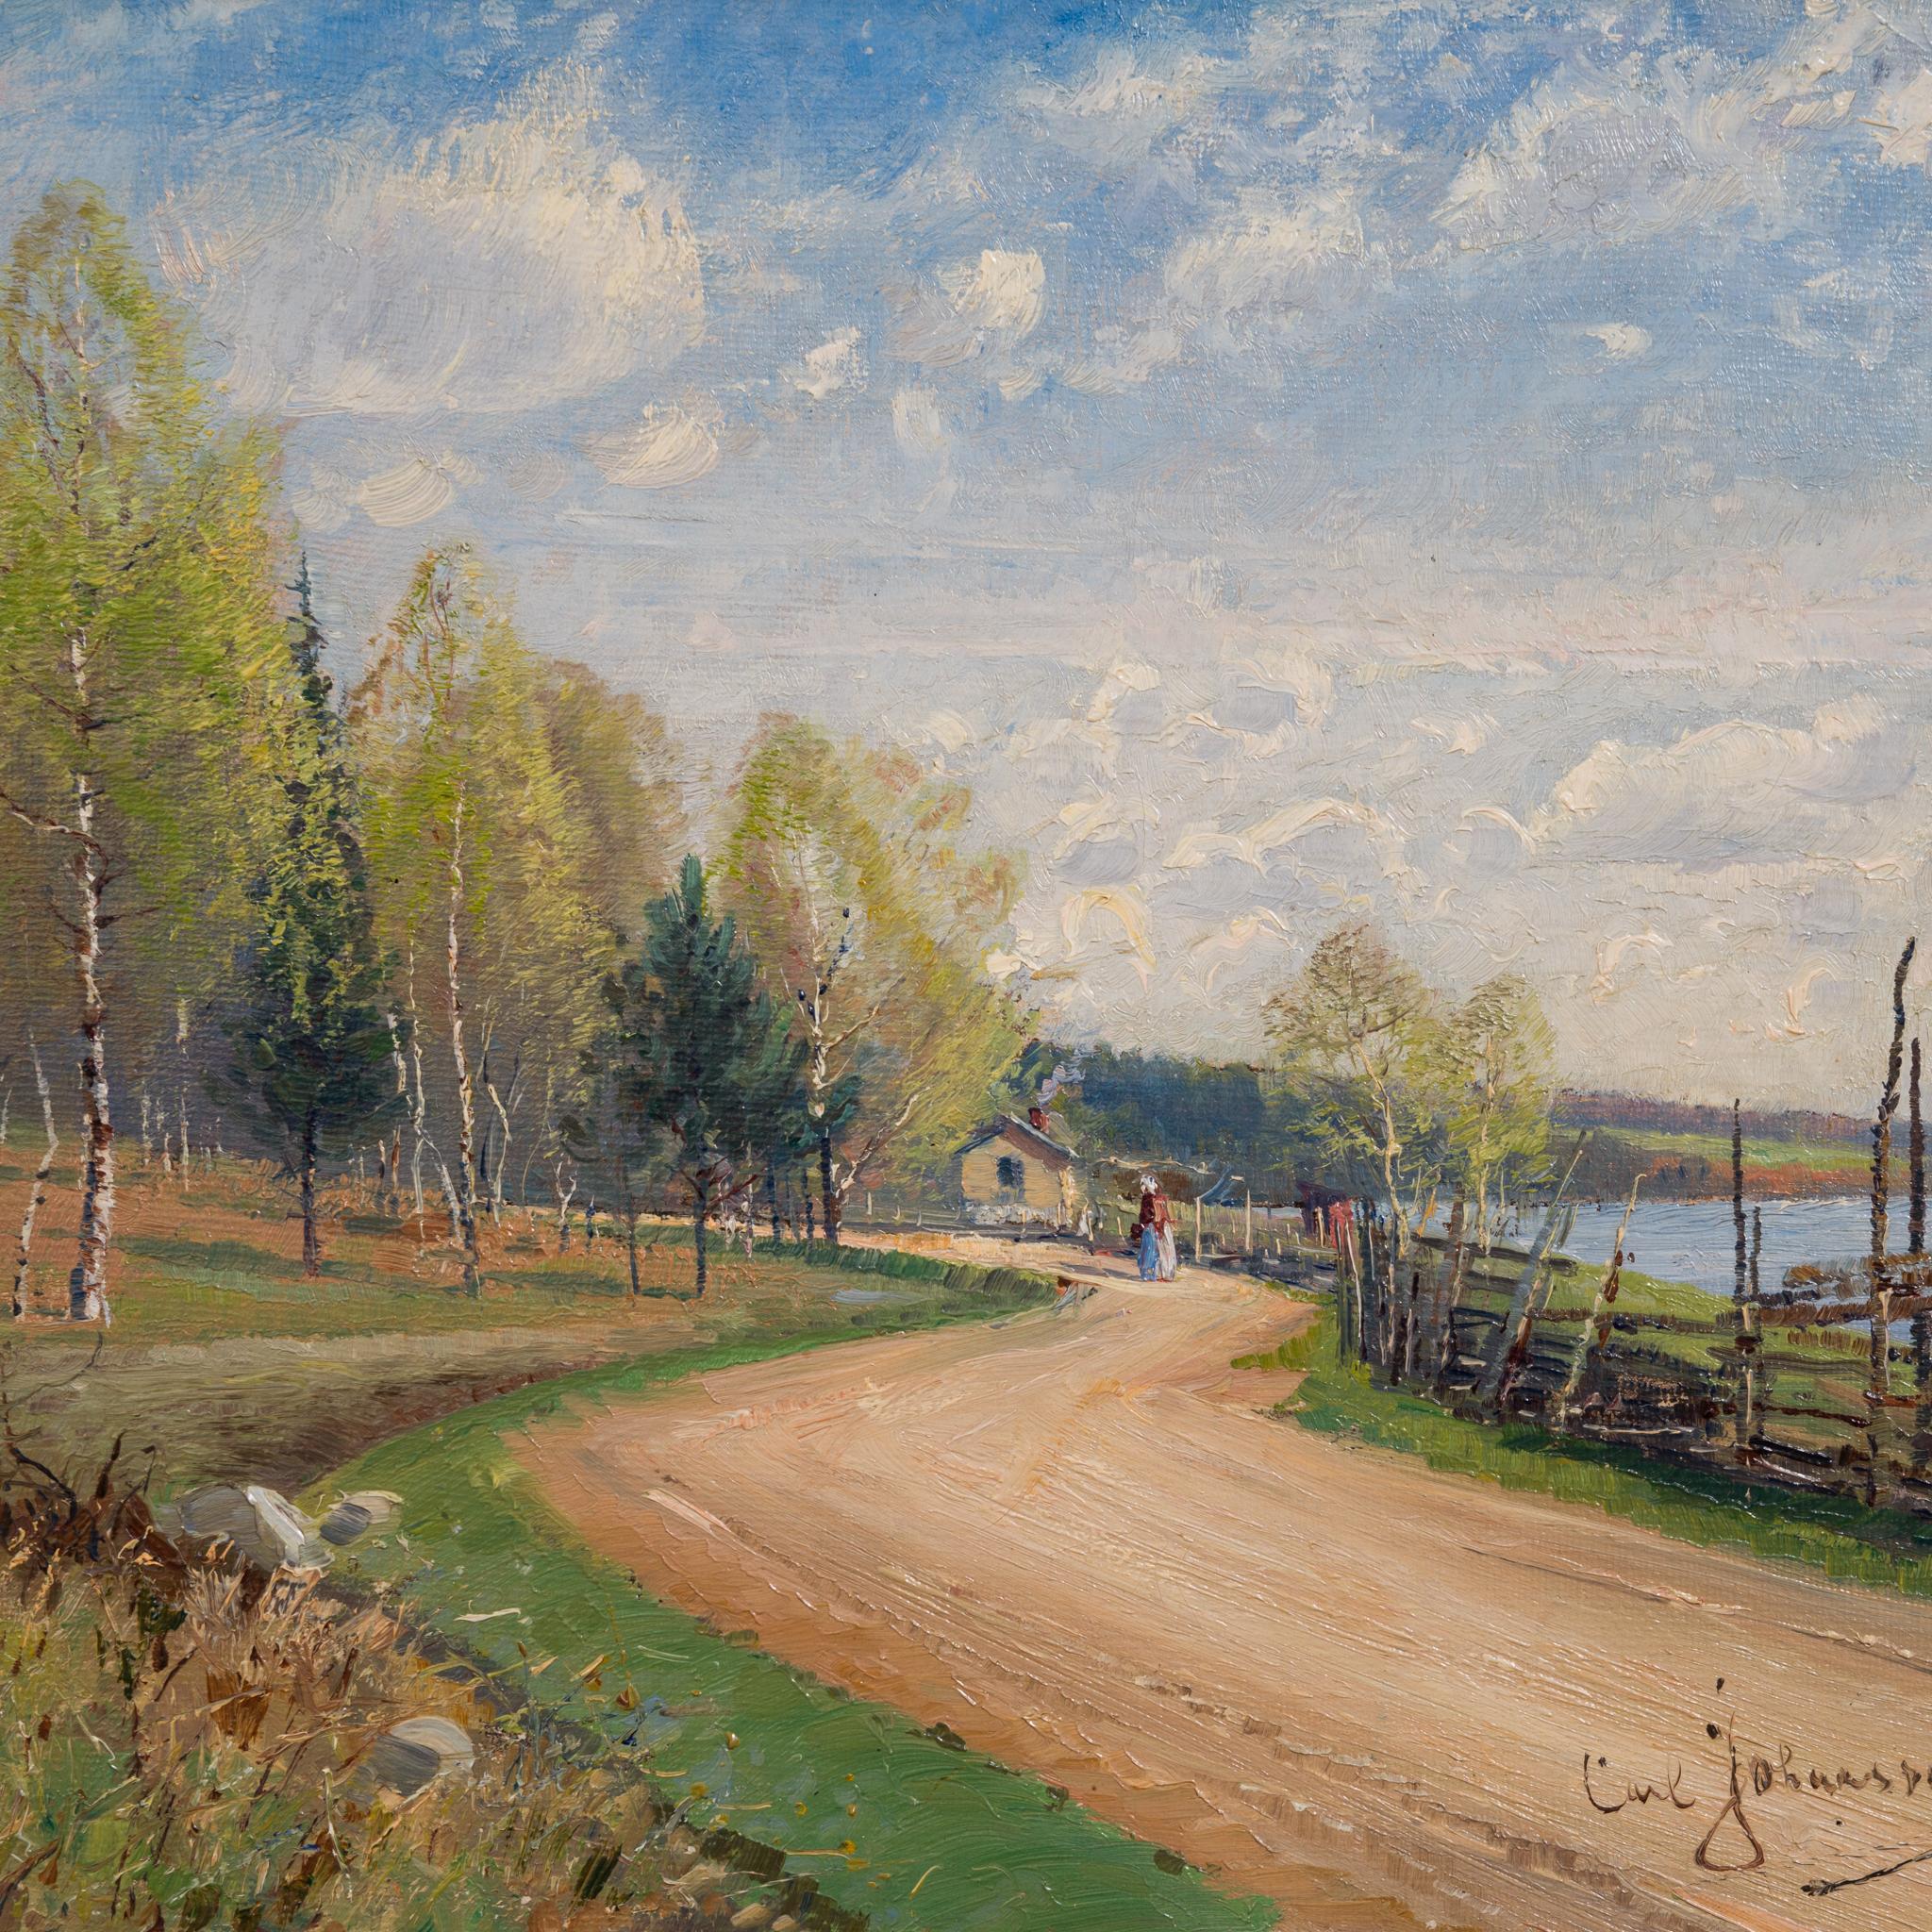 Impressionistic Summer Landscape with Road Painted 1889 - Painting by Carl Johansson 